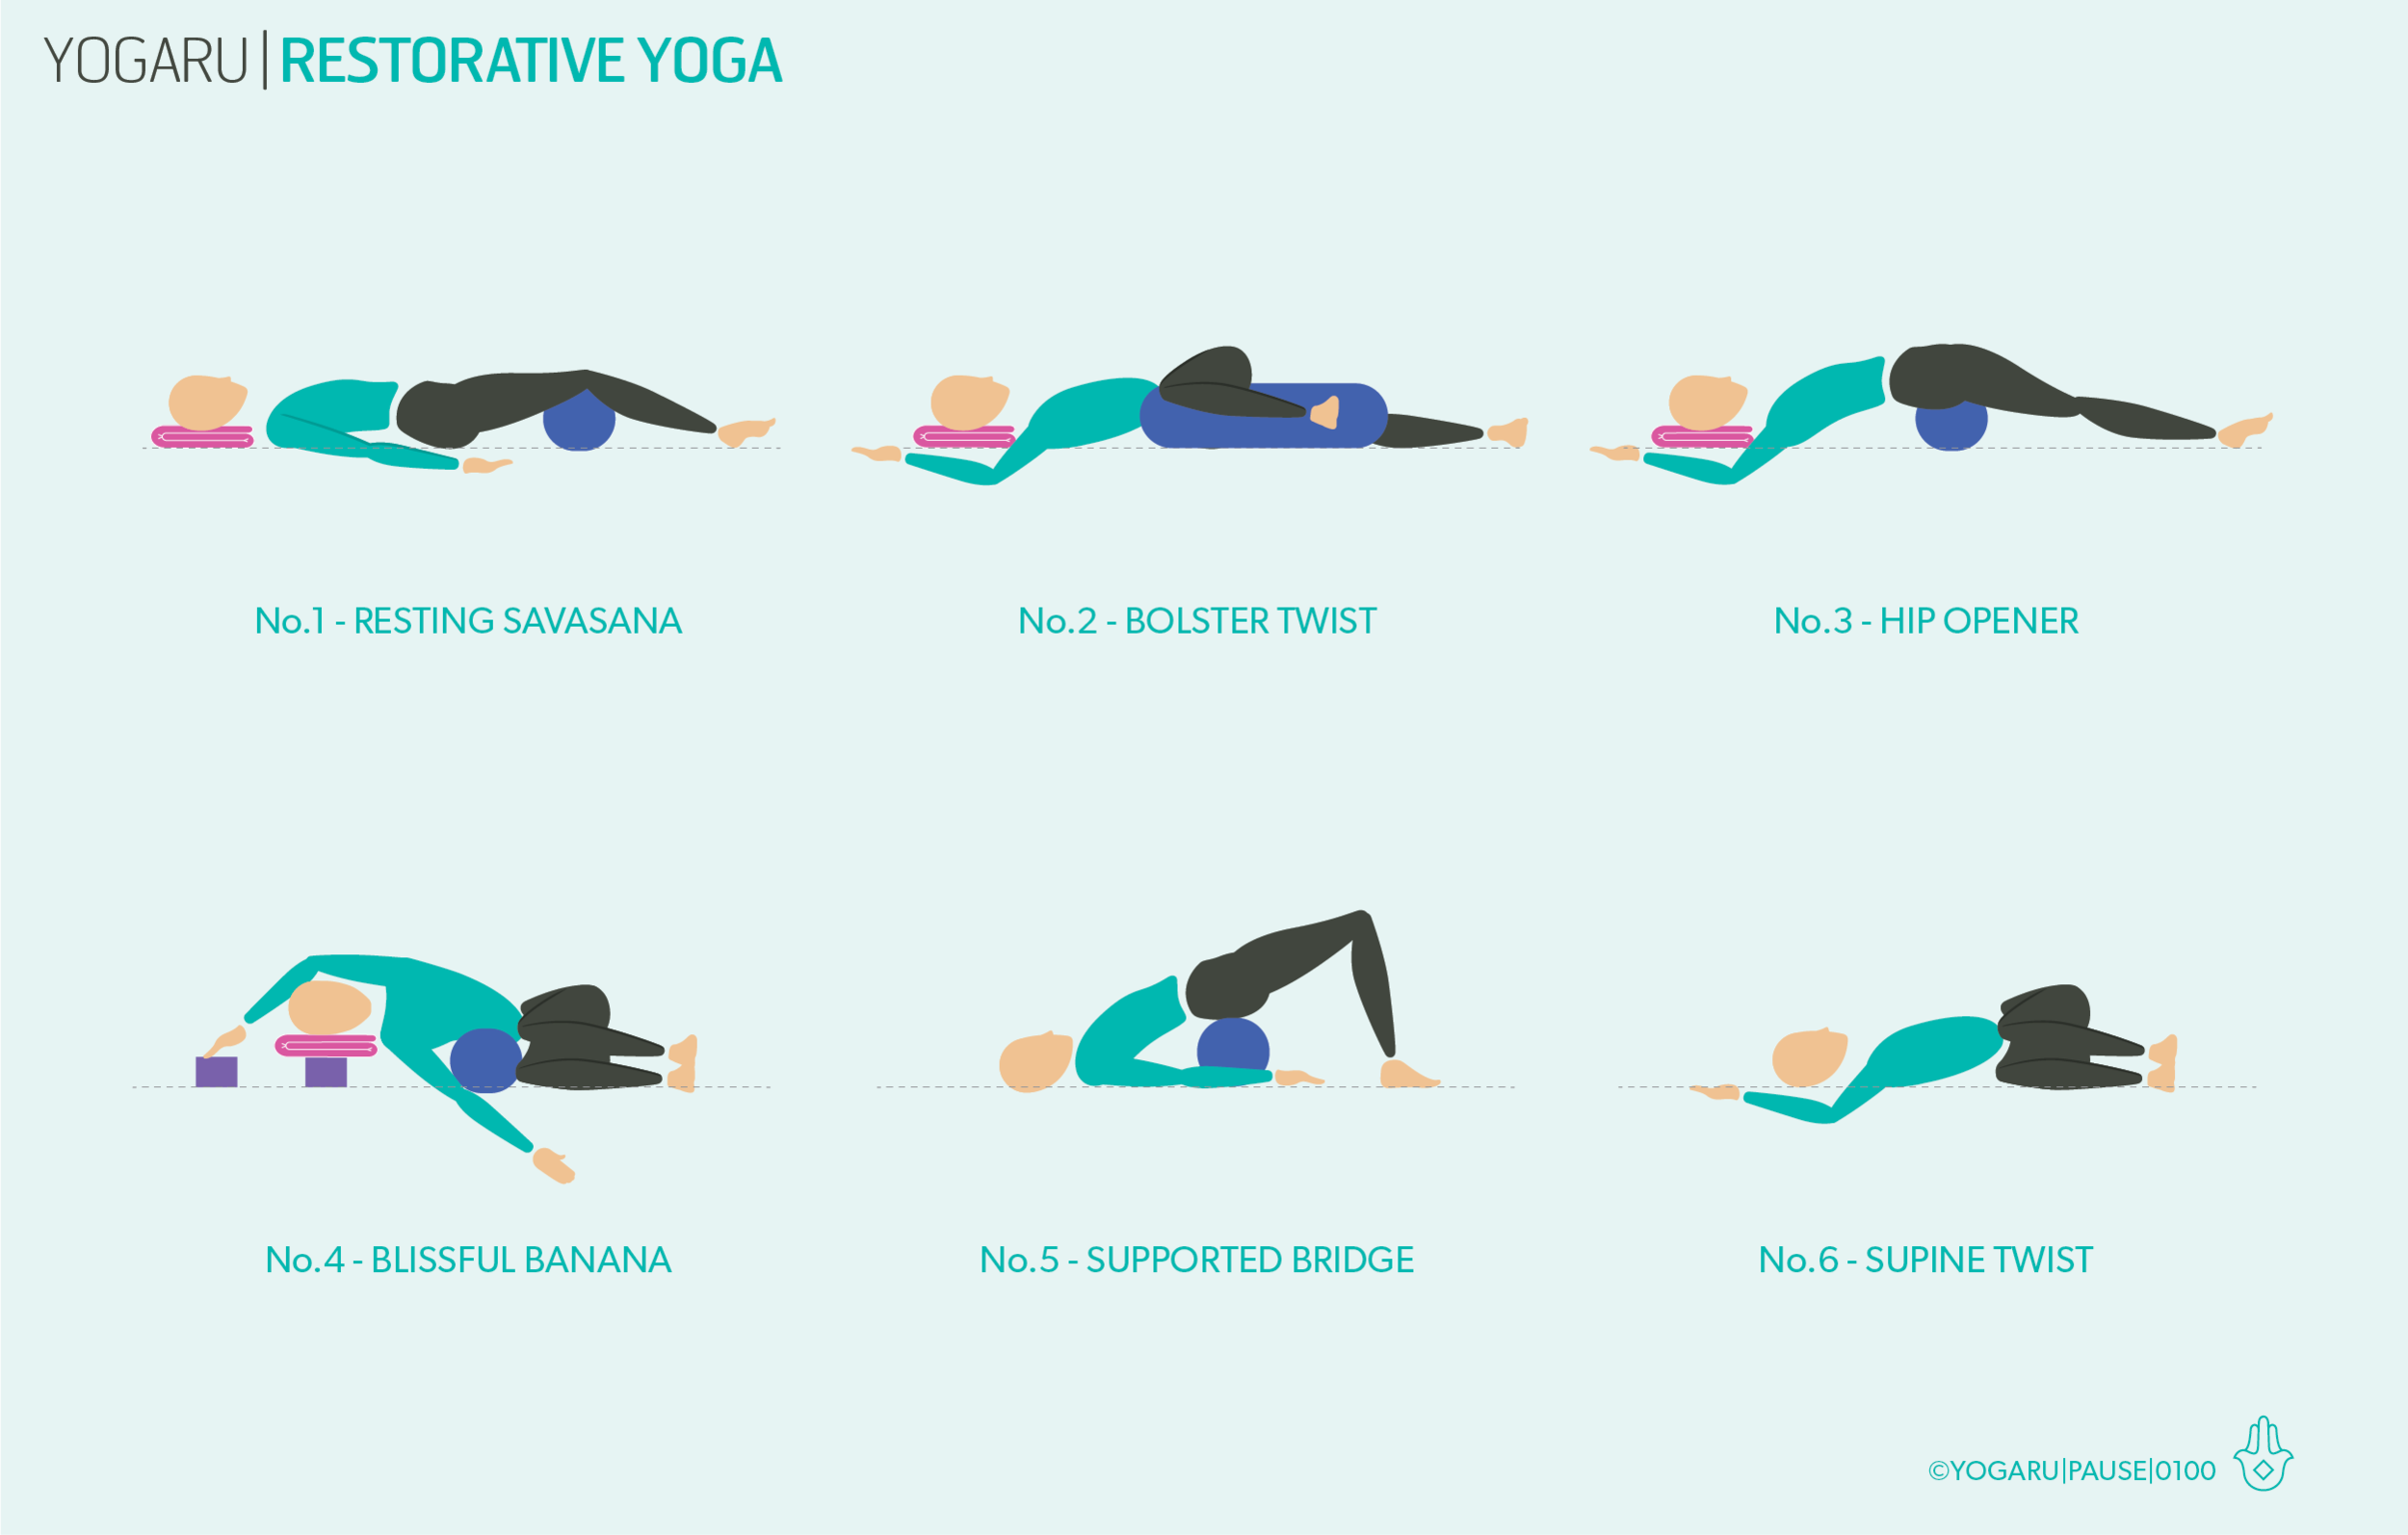 10 Yoga Poses For Relaxation – Rest and Digest